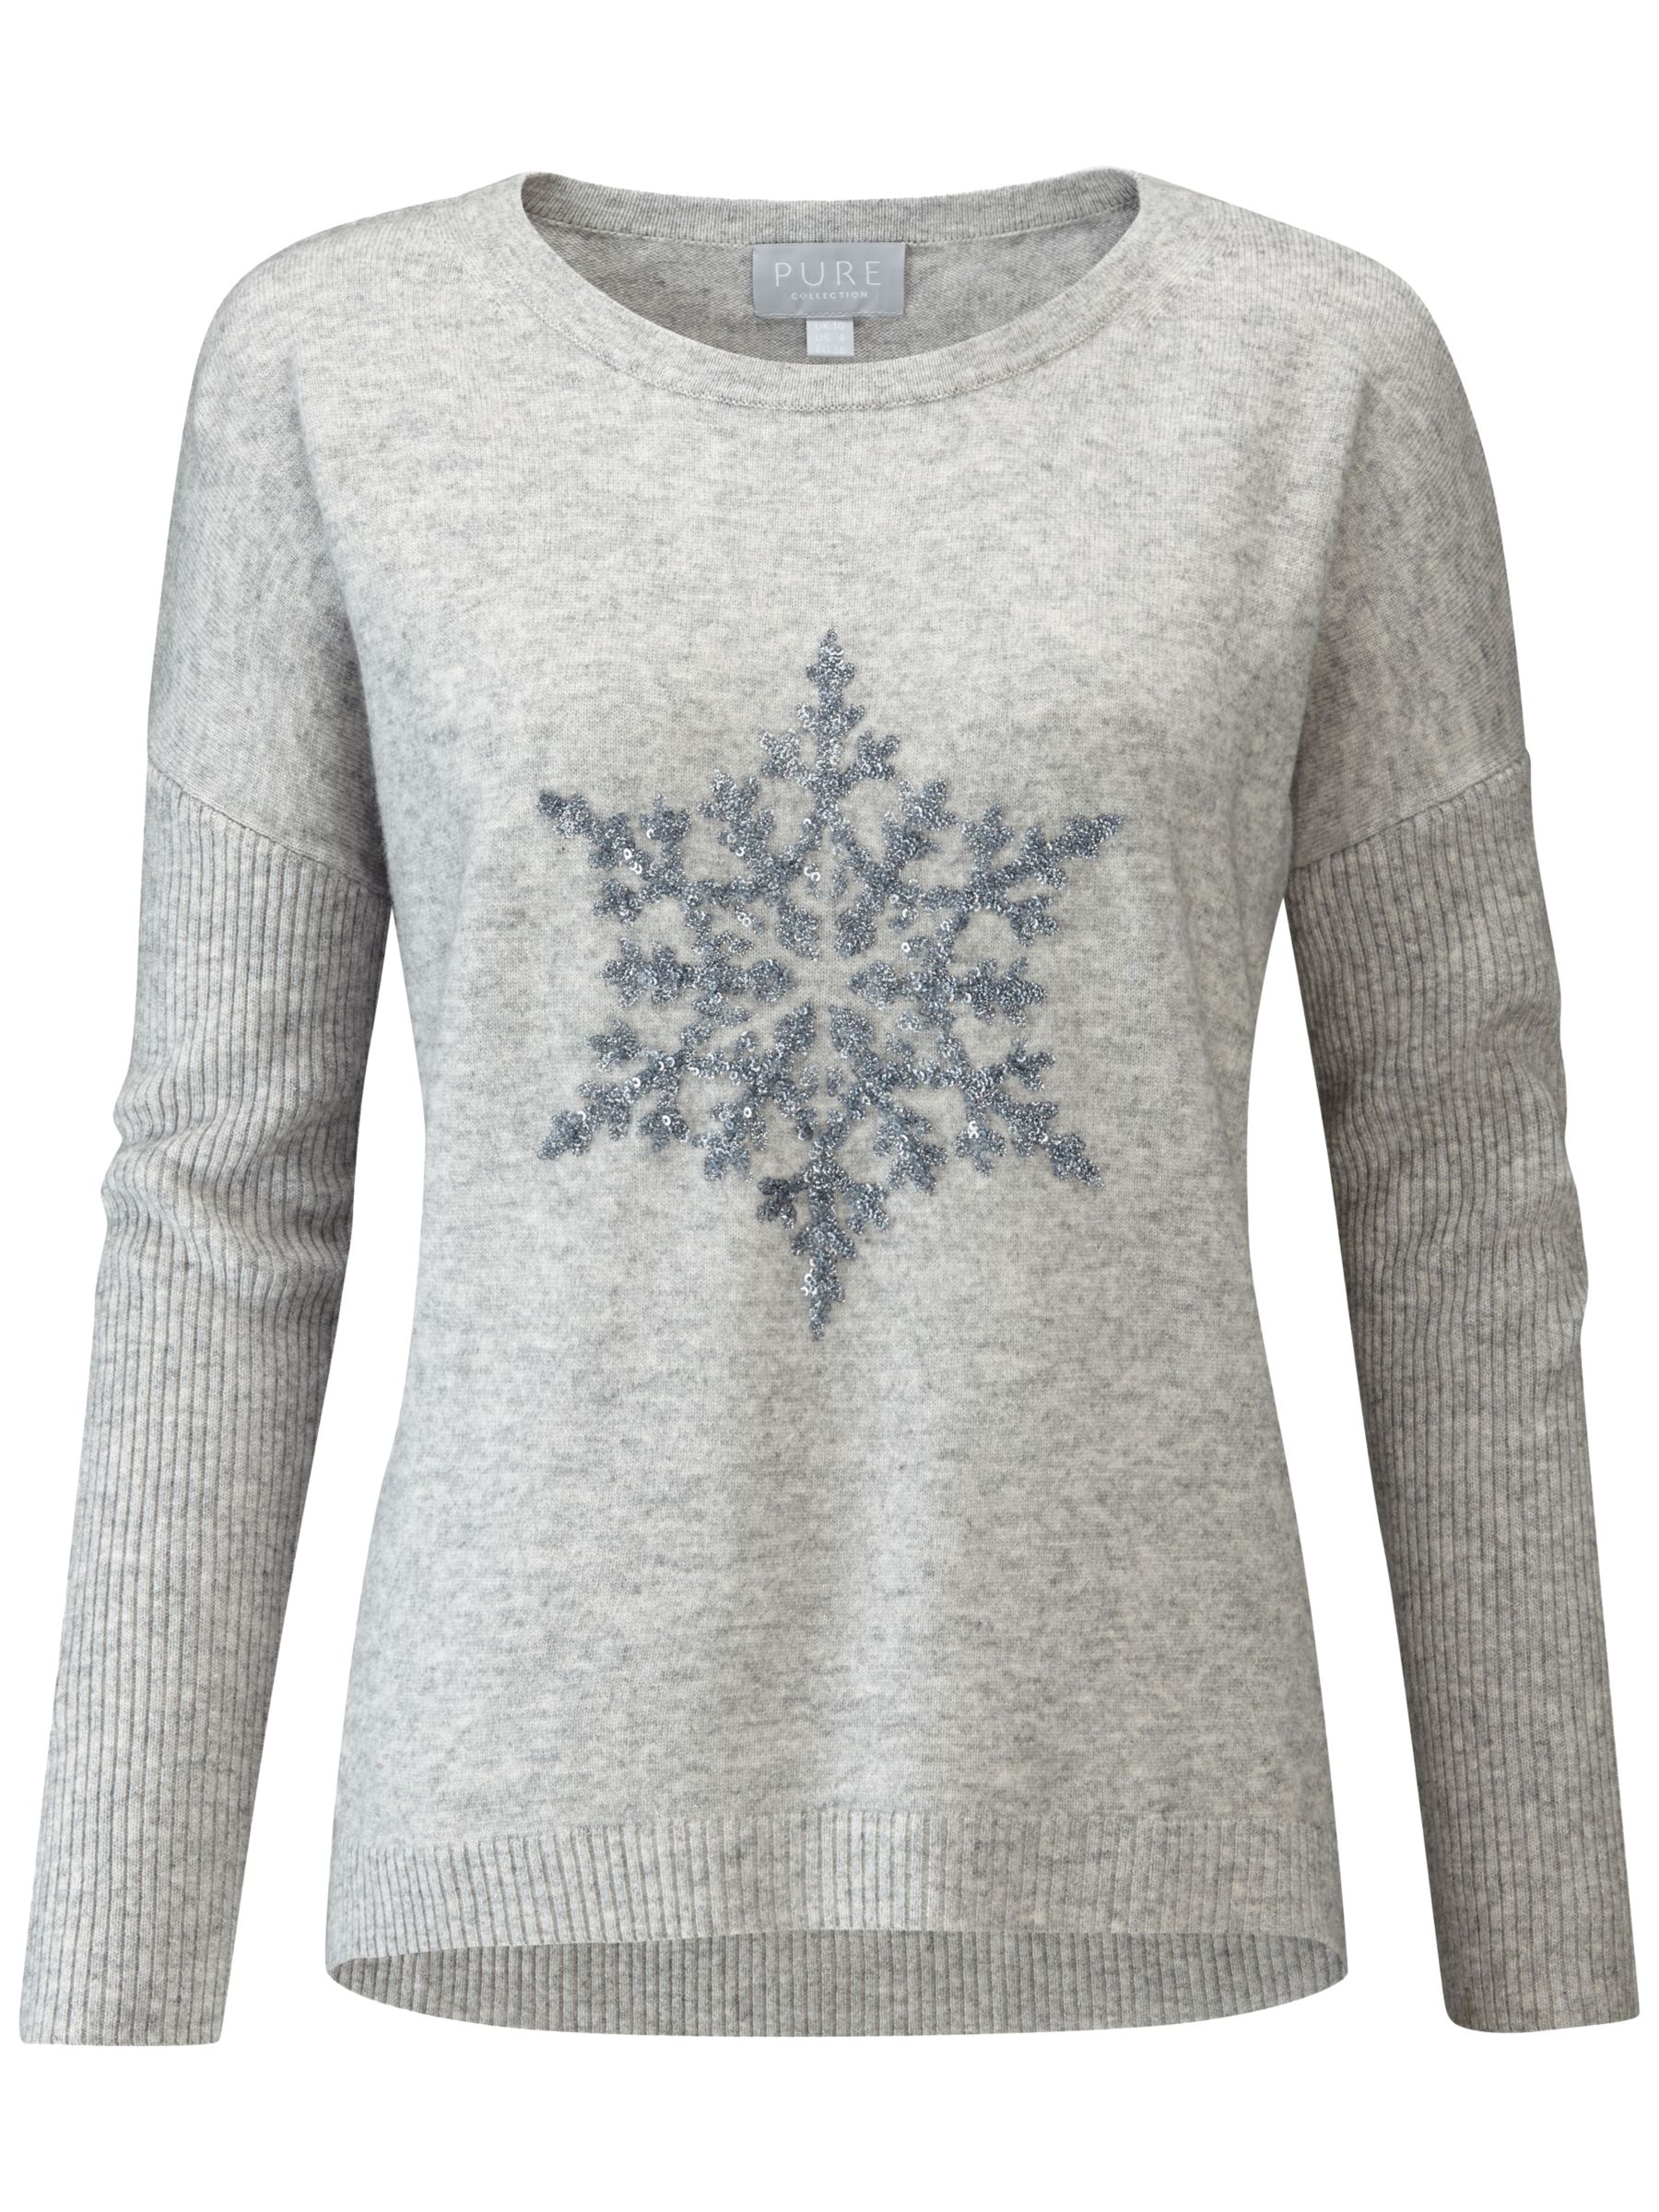 Pure Collection Sparkle Snowflake Dipped Hem Jumper, Grey, 14